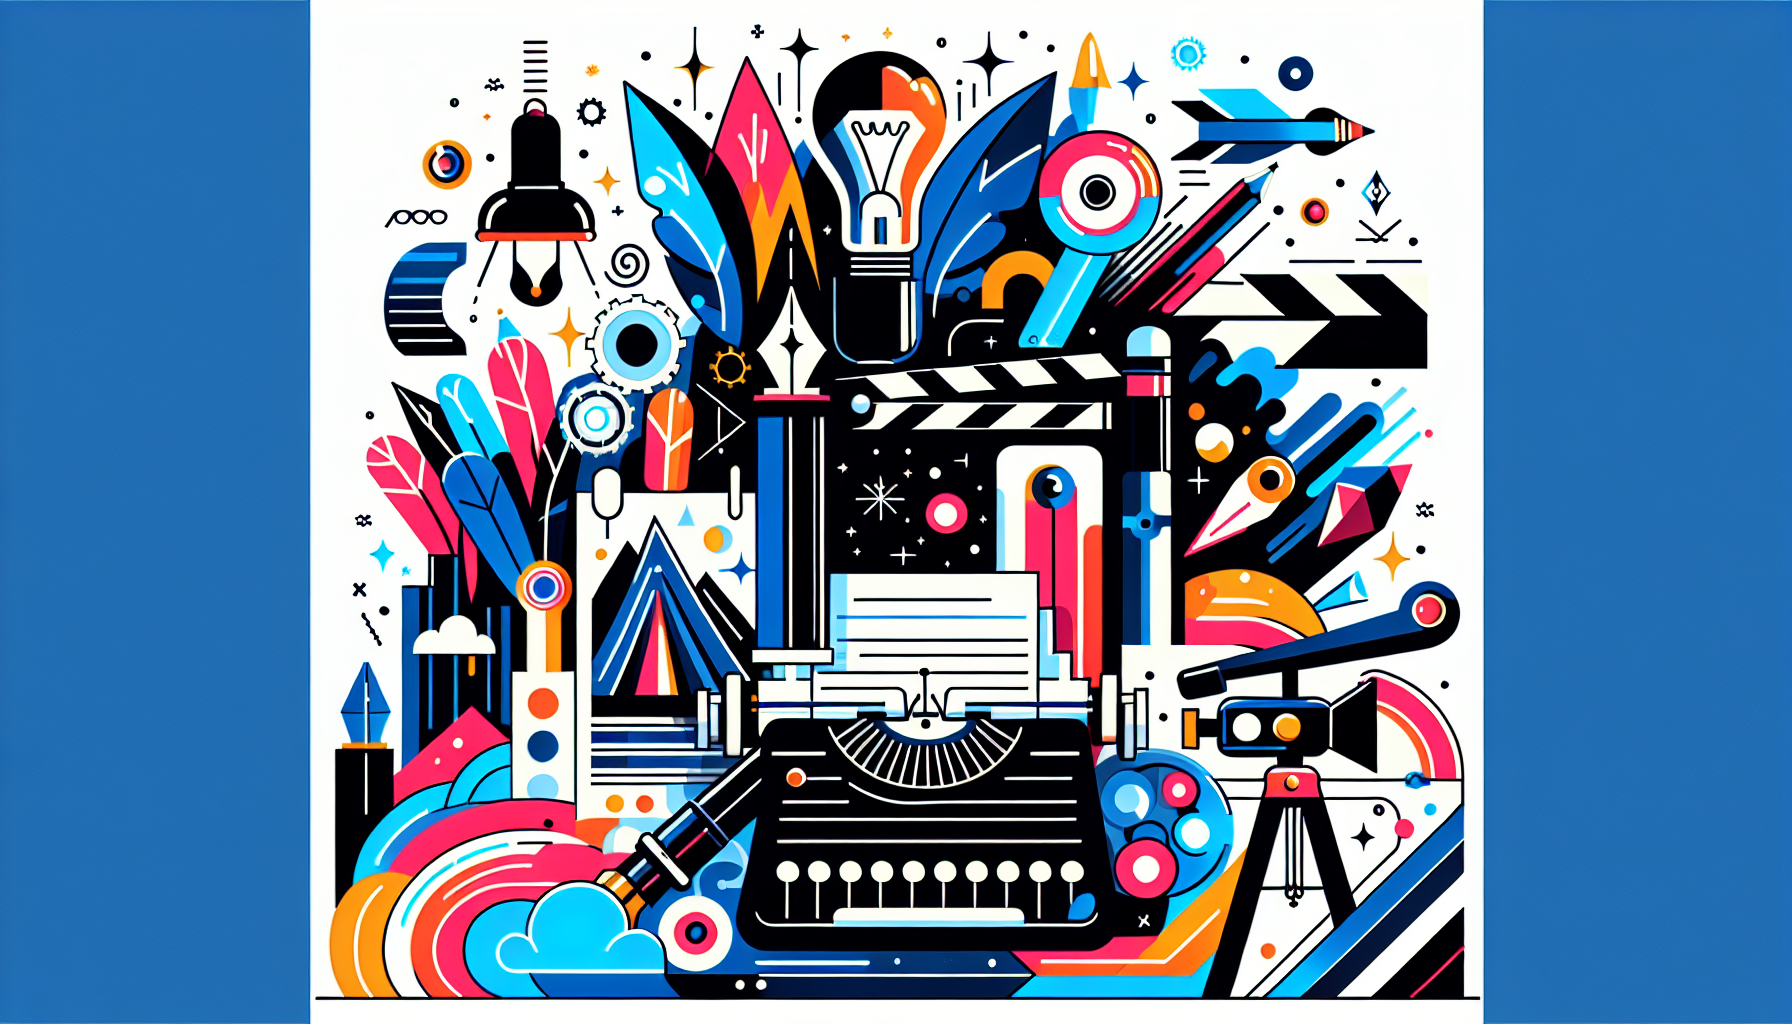 An abstract, colorful, modern-style illustration that conveys 'Top Screenwriting Tips for Aspiring Writers'. Perhaps it features a mix of symbols commonly associated with screenwriting, like a fountain pen, a screenplay, a typewriter, and a movie clapper. Also include symbols representative of learning and aspiring, such as a light bulb, a mountain summit, or a rocket. Please note that no words or text should be included in the illustration.